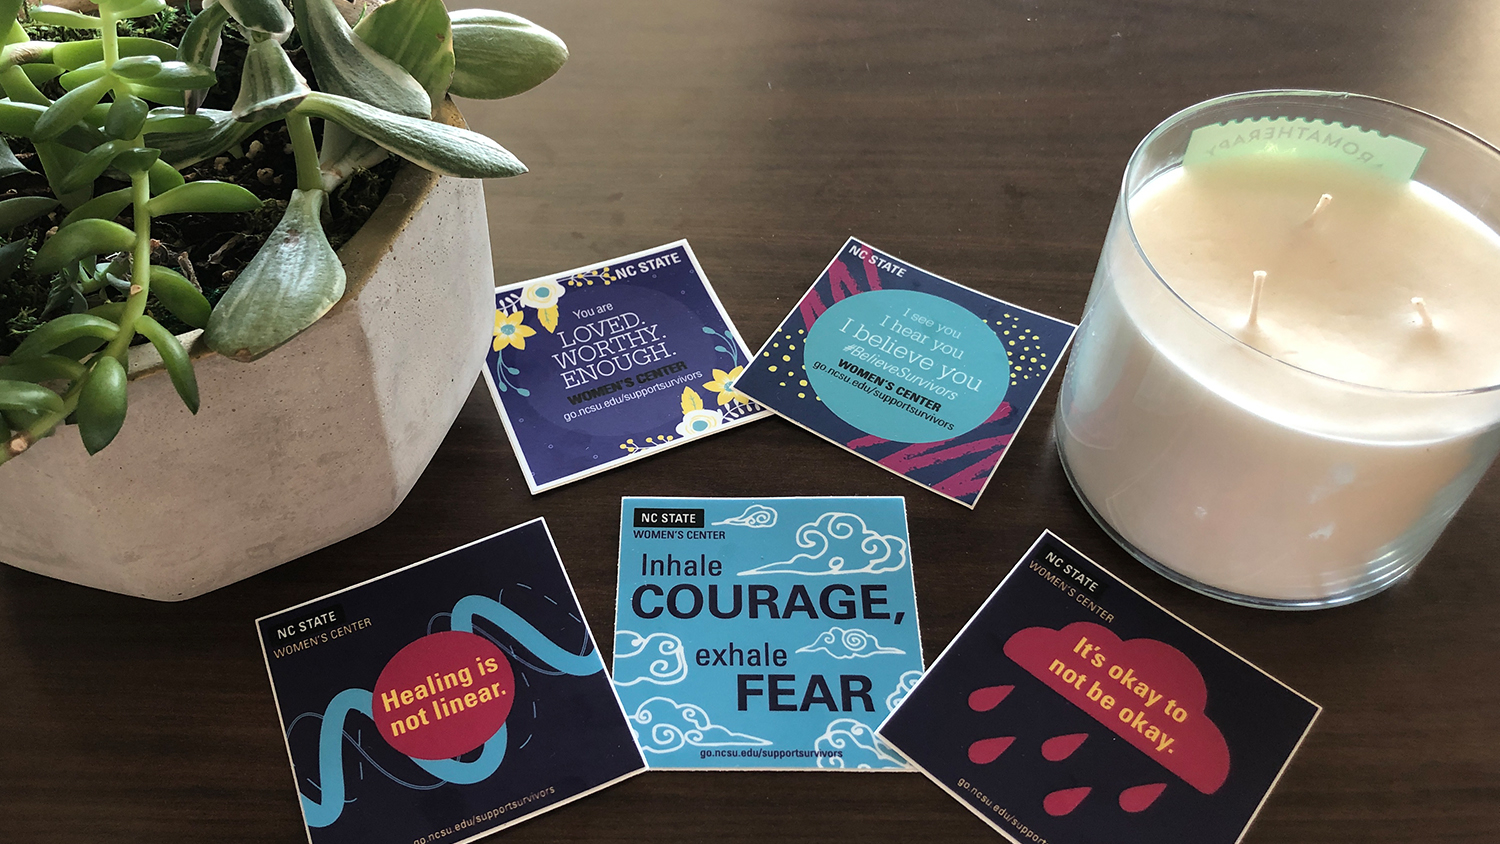 Display of empowering stickers from the Women's Center